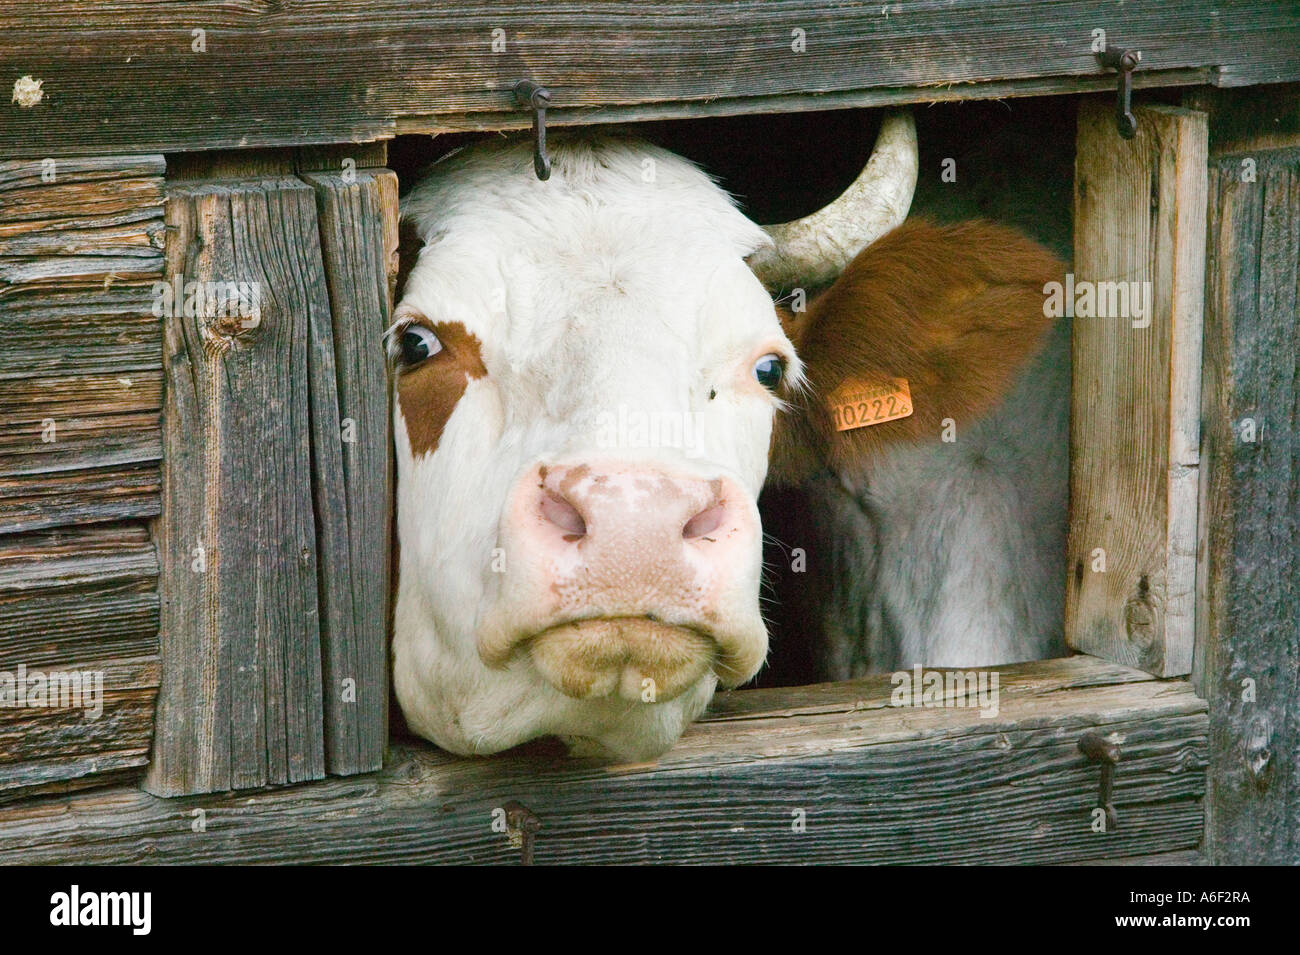 Cow in stable Stock Photo